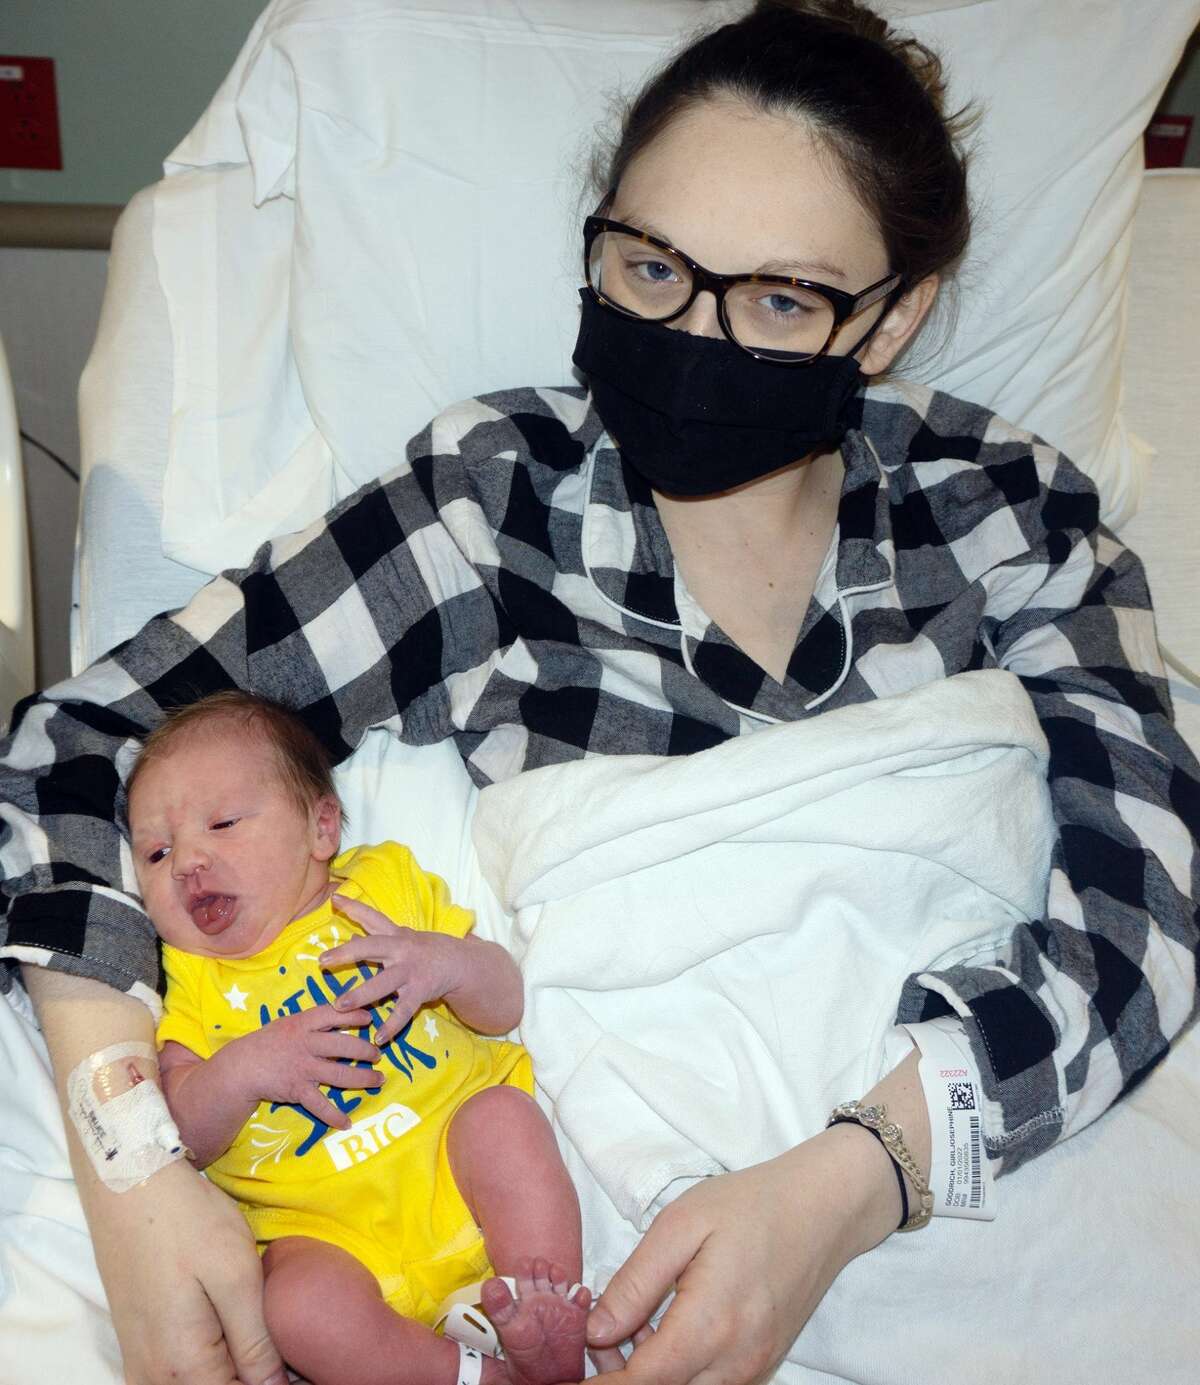 Cecelia Quinn Wittman, pictured here with her mother, Josephine, was the first baby born at Alton Memorial Hospital for 2022. She arrived at 4:30 a.m. on Jan. 1.